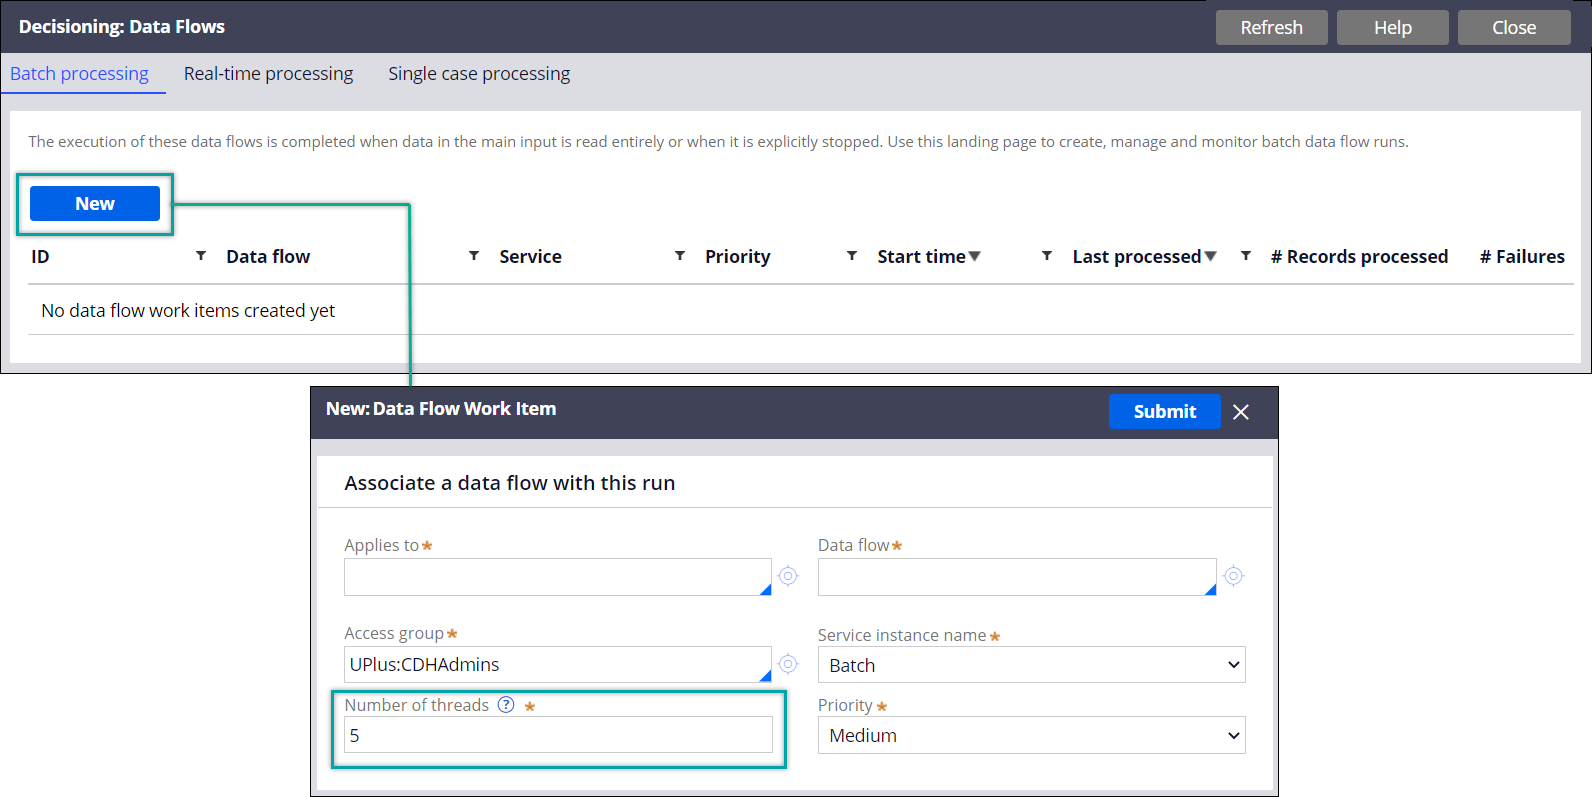 By clicking New on the Data flows landing page, you can create a new data flow run and set the number of threads.